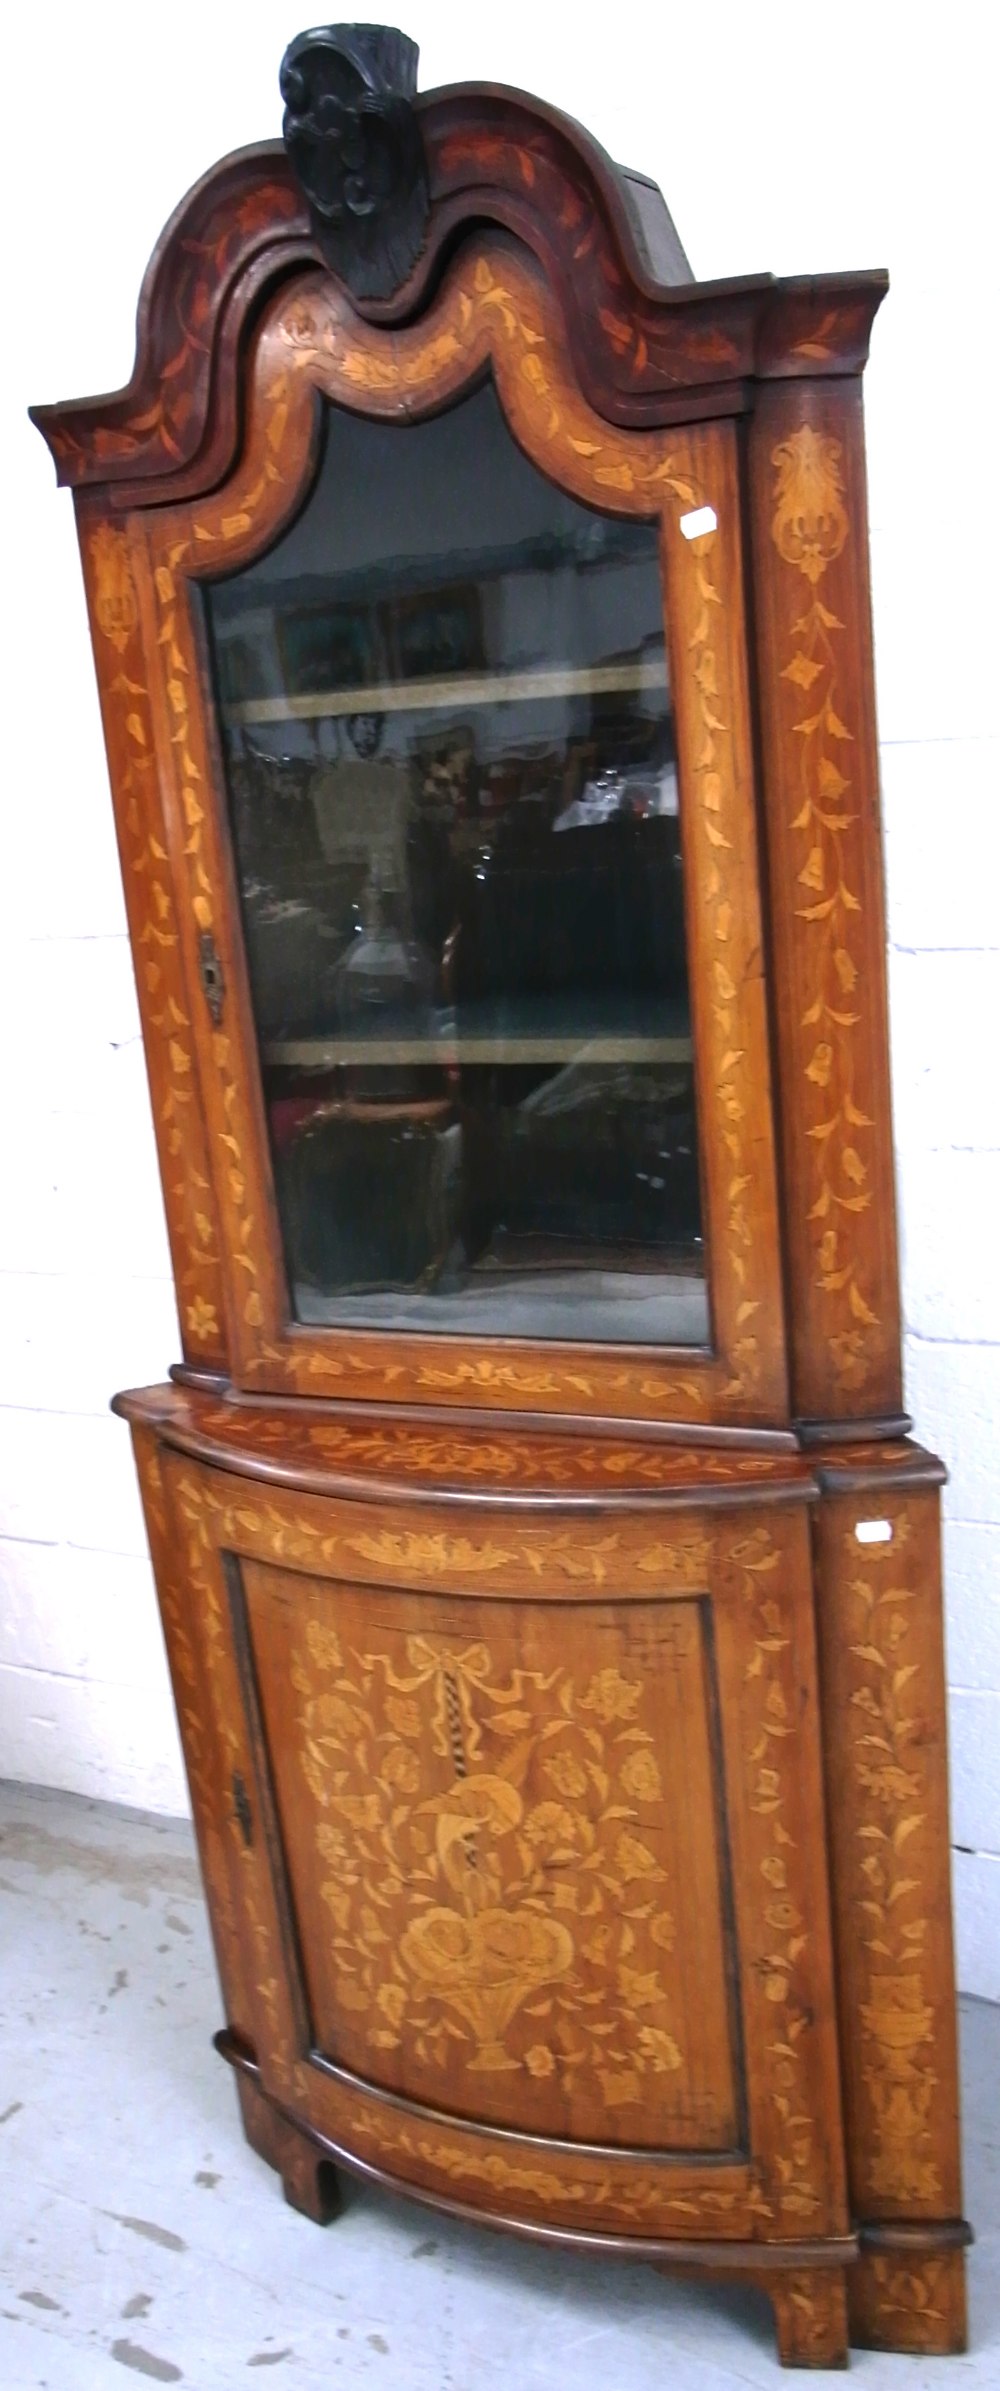 A 19th century Dutch walnut and floral marquetry inlaid display cabinet,